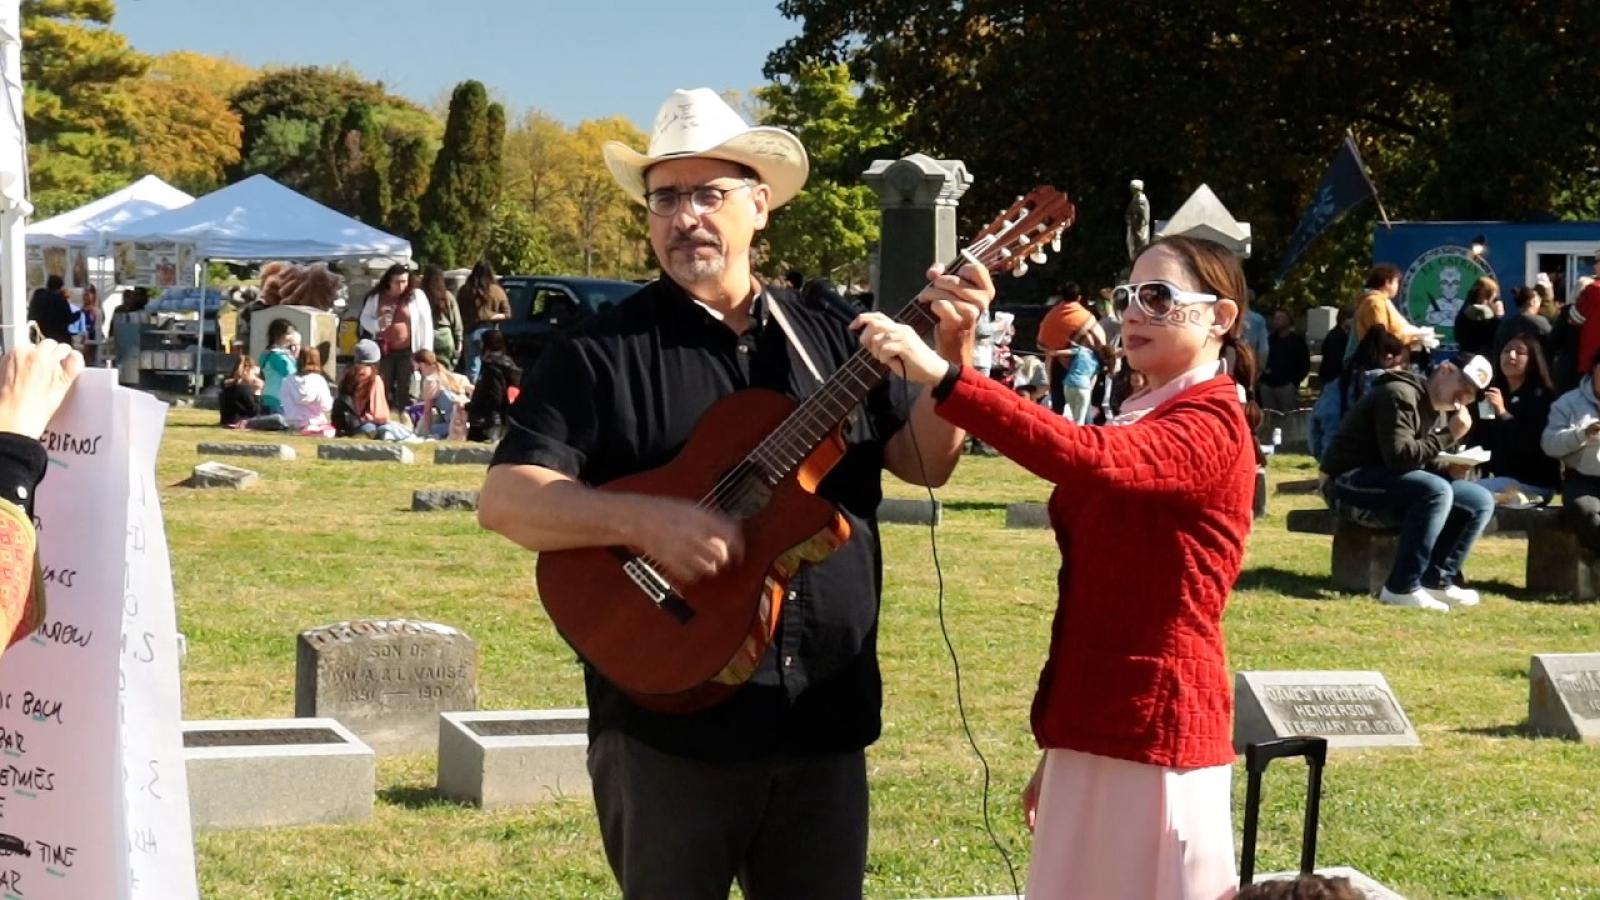 A man playing guitar next to a woman in a red jacket